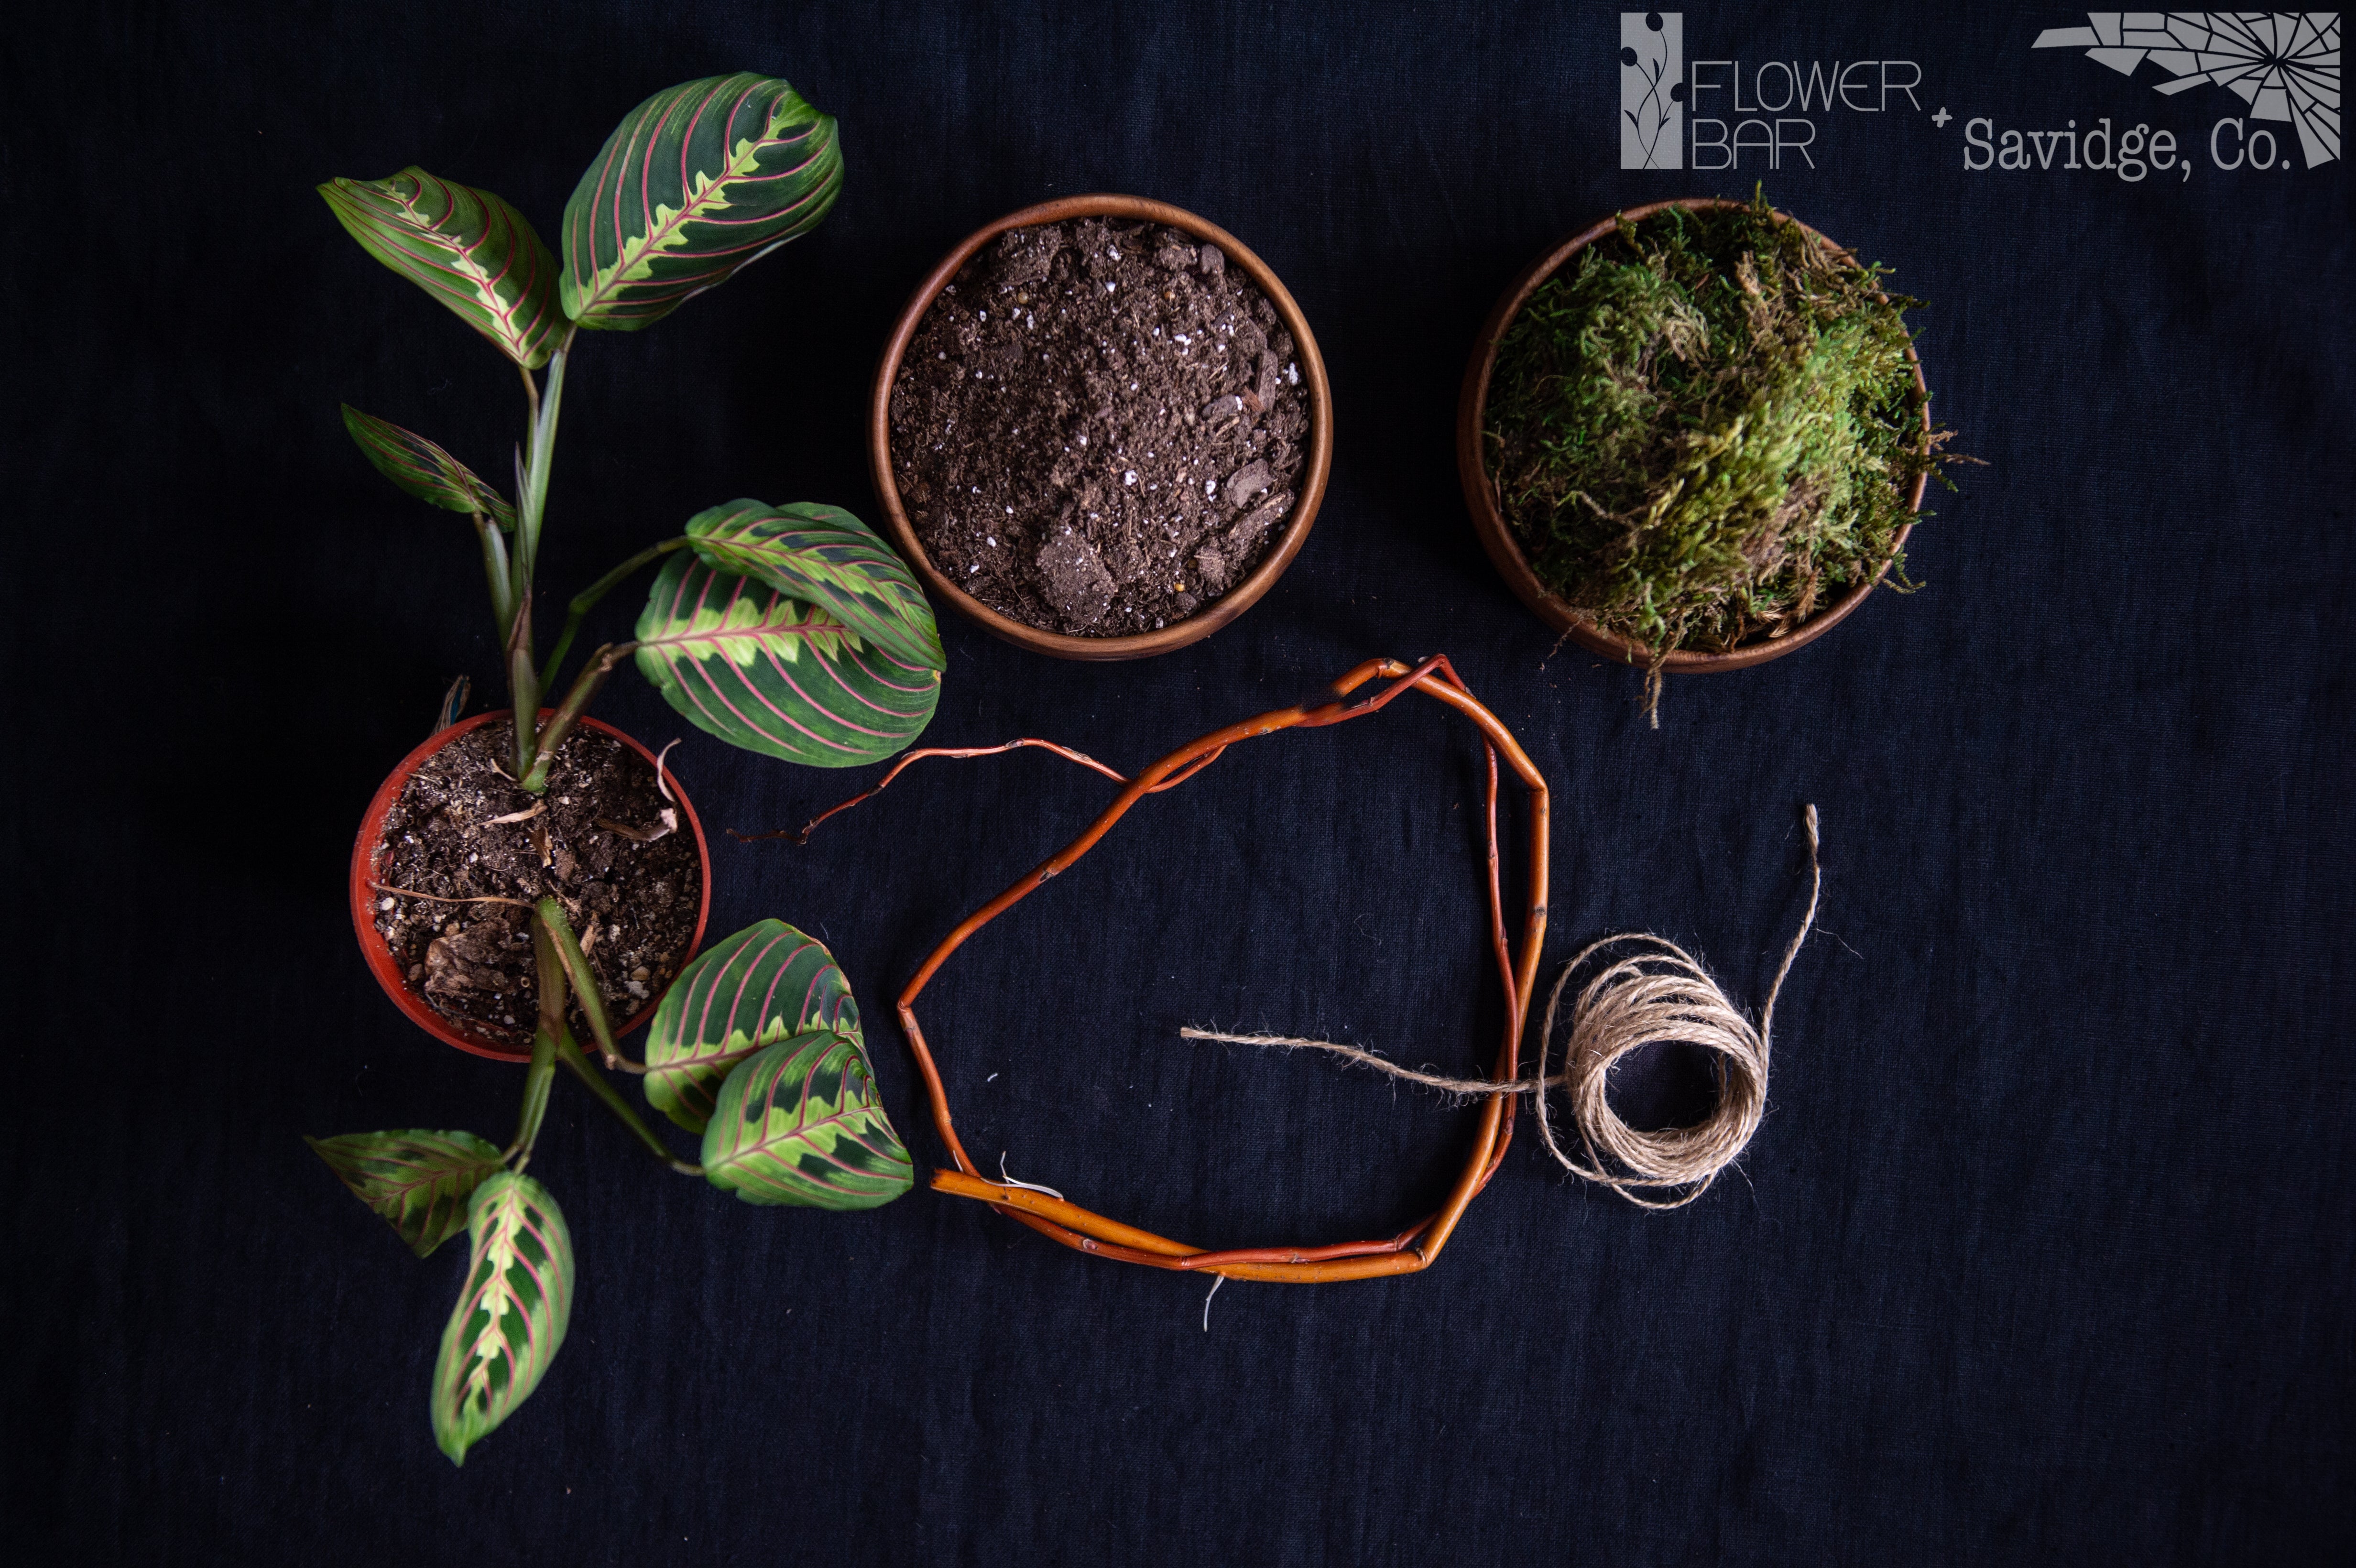 The Forest Plant Project ingredients pictured is a plant, soil, moss, branch, and twine